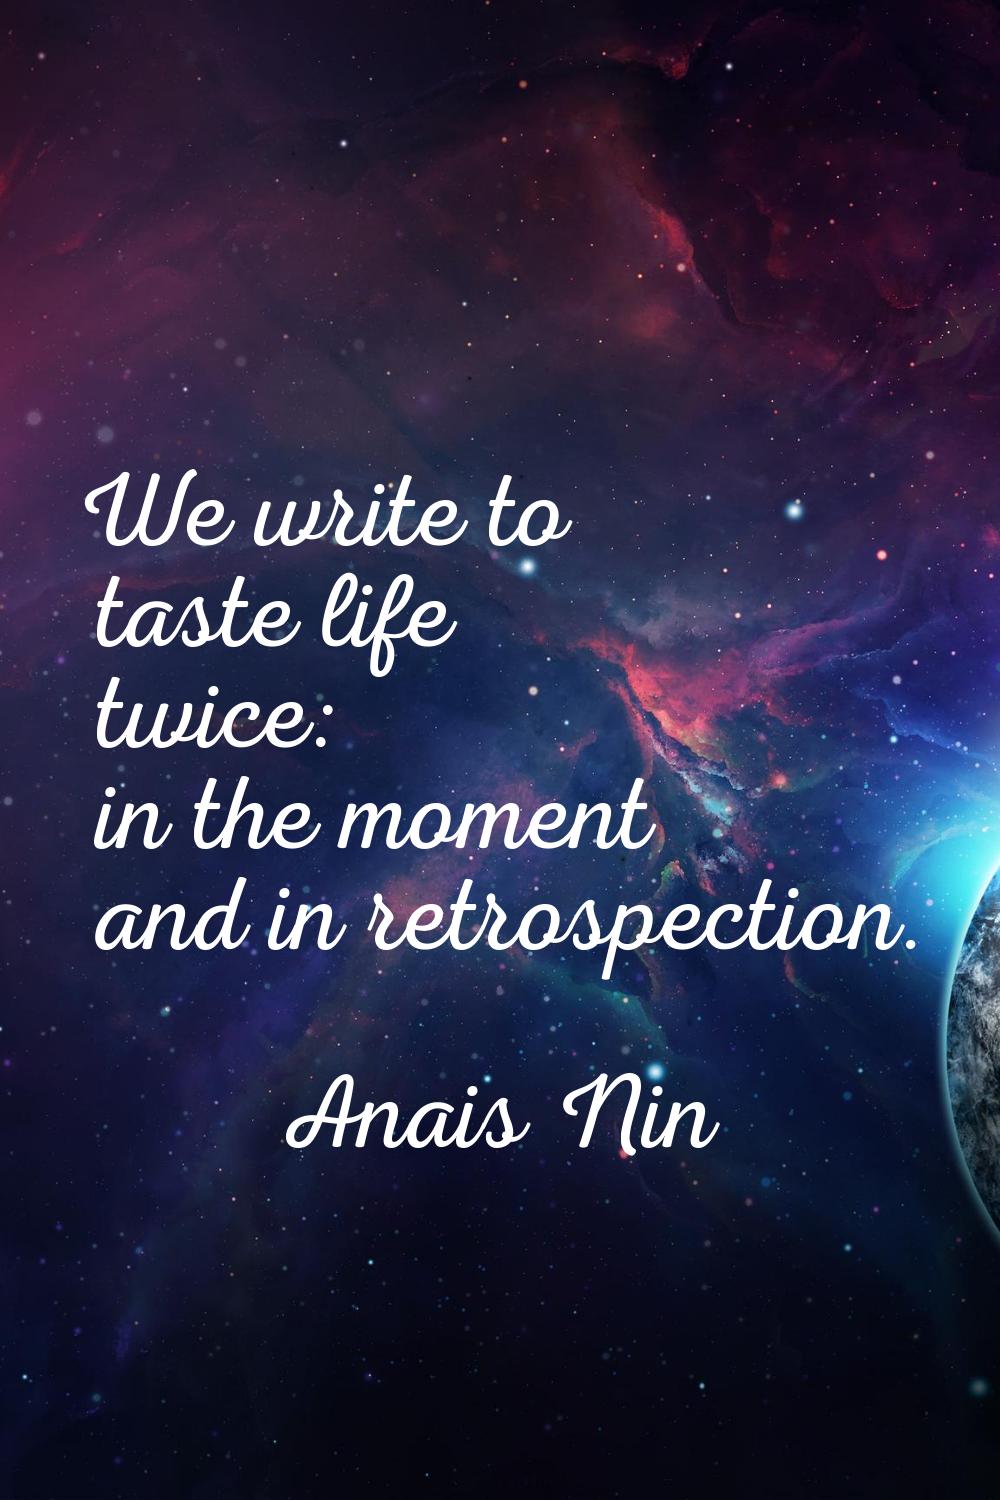 We write to taste life twice: in the moment and in retrospection.